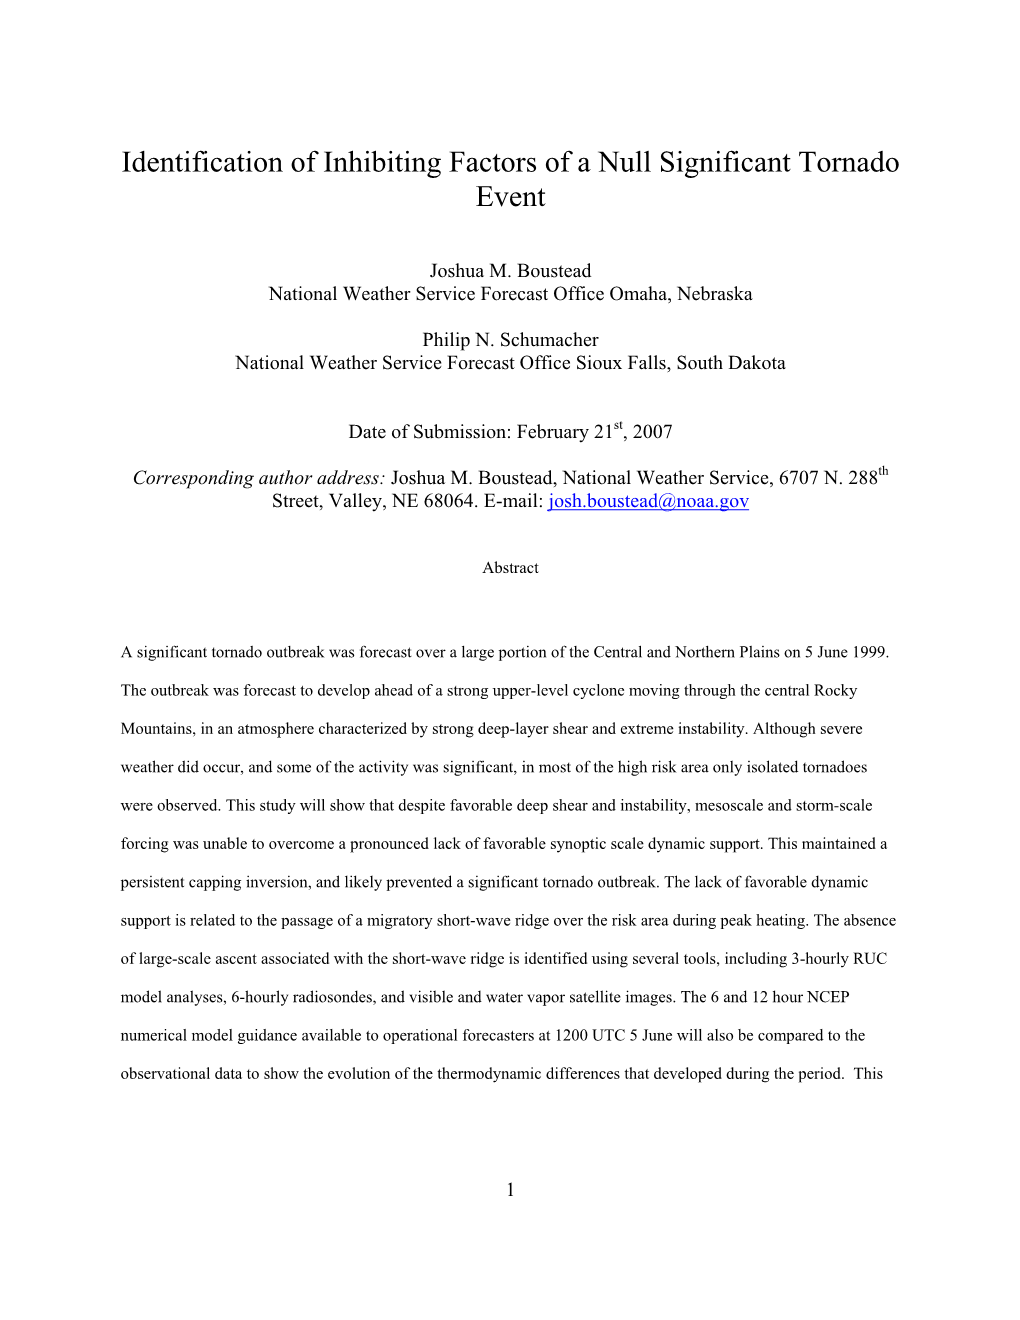 Identification of Inhibiting Factors of a Null Significant Tornado Event